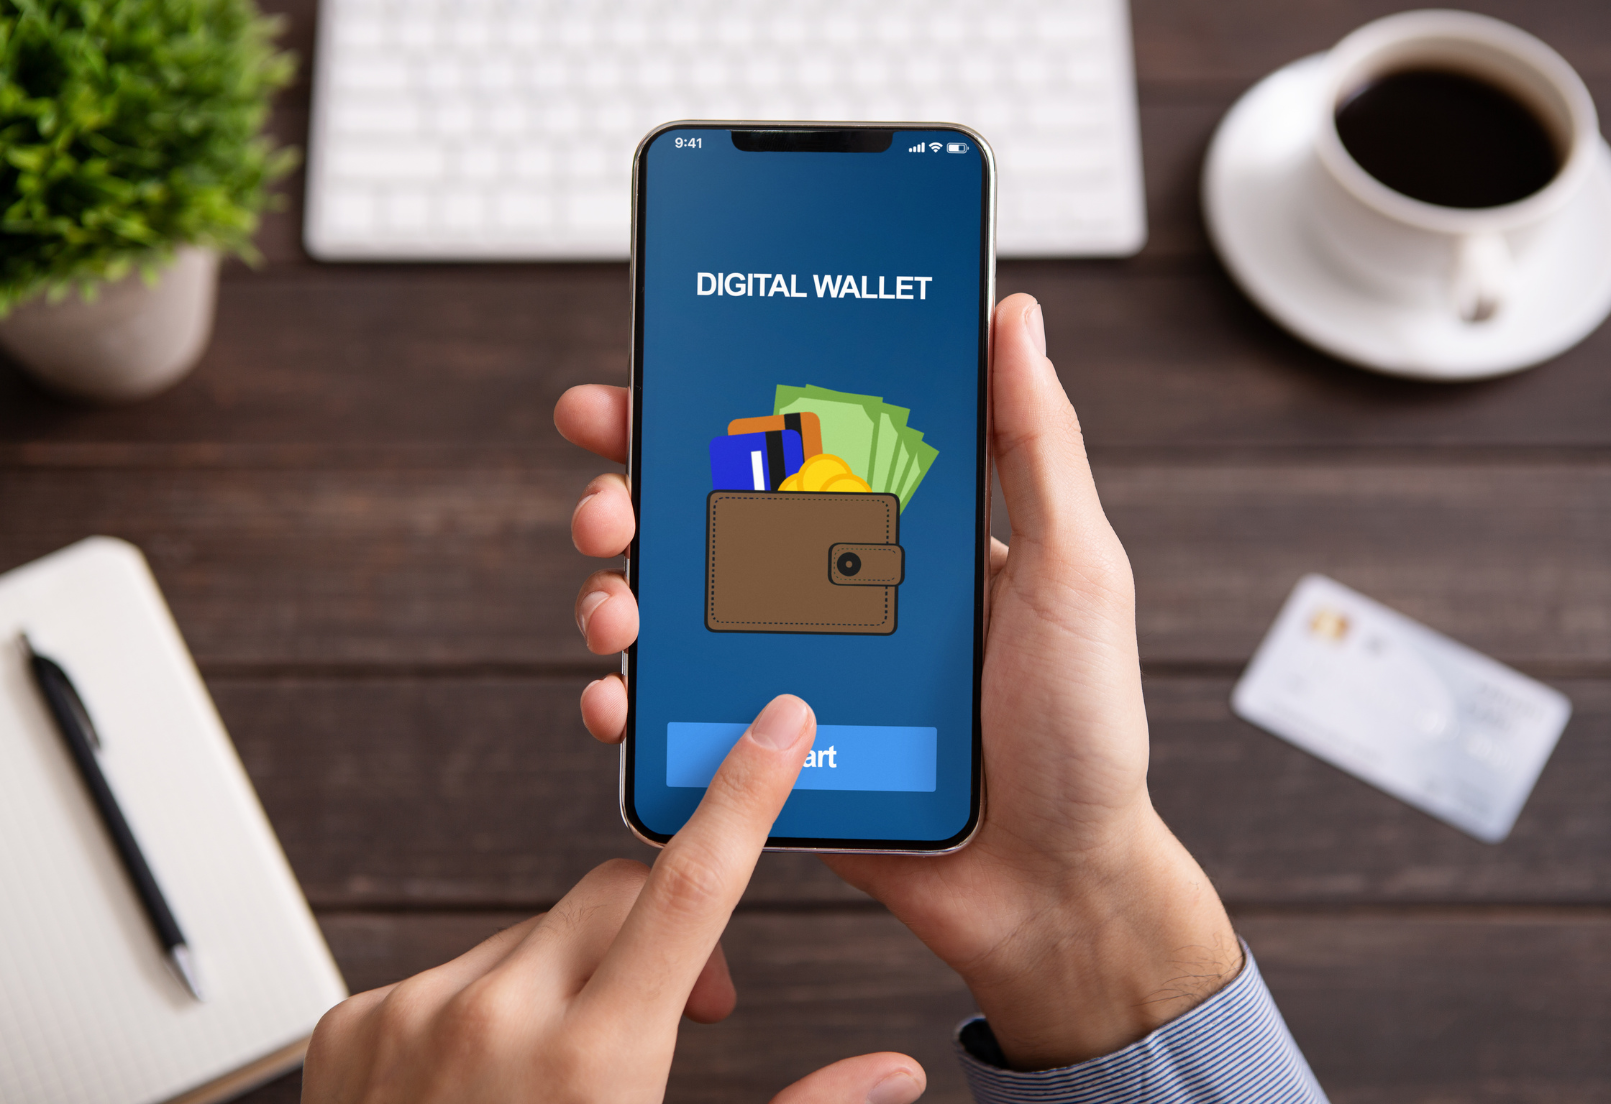 Digital Wallet Users to Exceed 4.4B by 2025